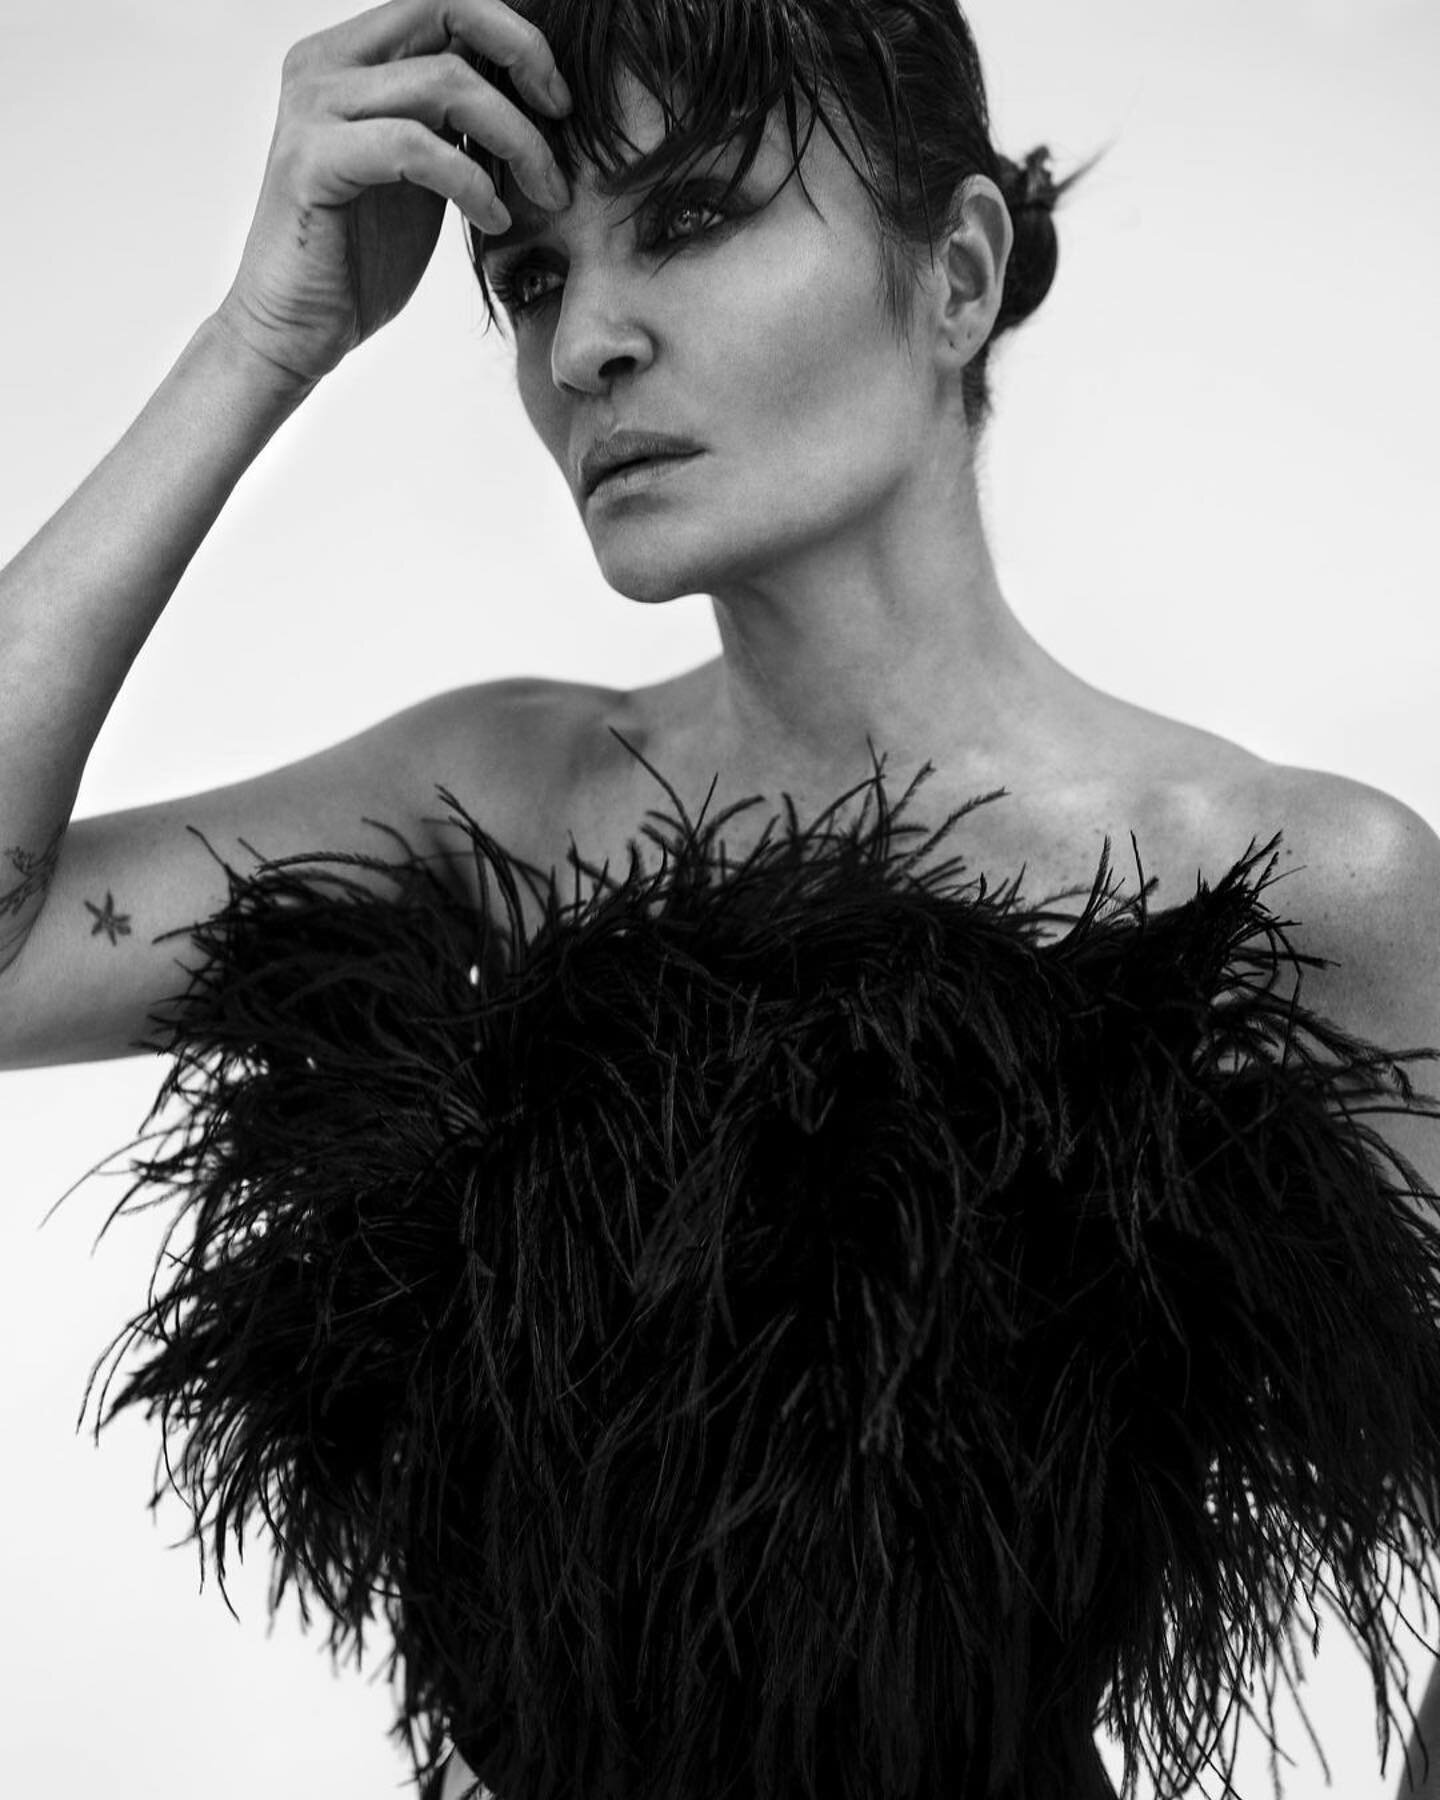 One more from this incredible day working with Helena Christensen x @numero_netherlands Photographed by @agataserge 💚💚💚

Photography: @agataserge / @exclusiveartists
Talent: @helenachristensen
Editor in Chief: @timiletonja
Styling: @kriss_vx
Styli